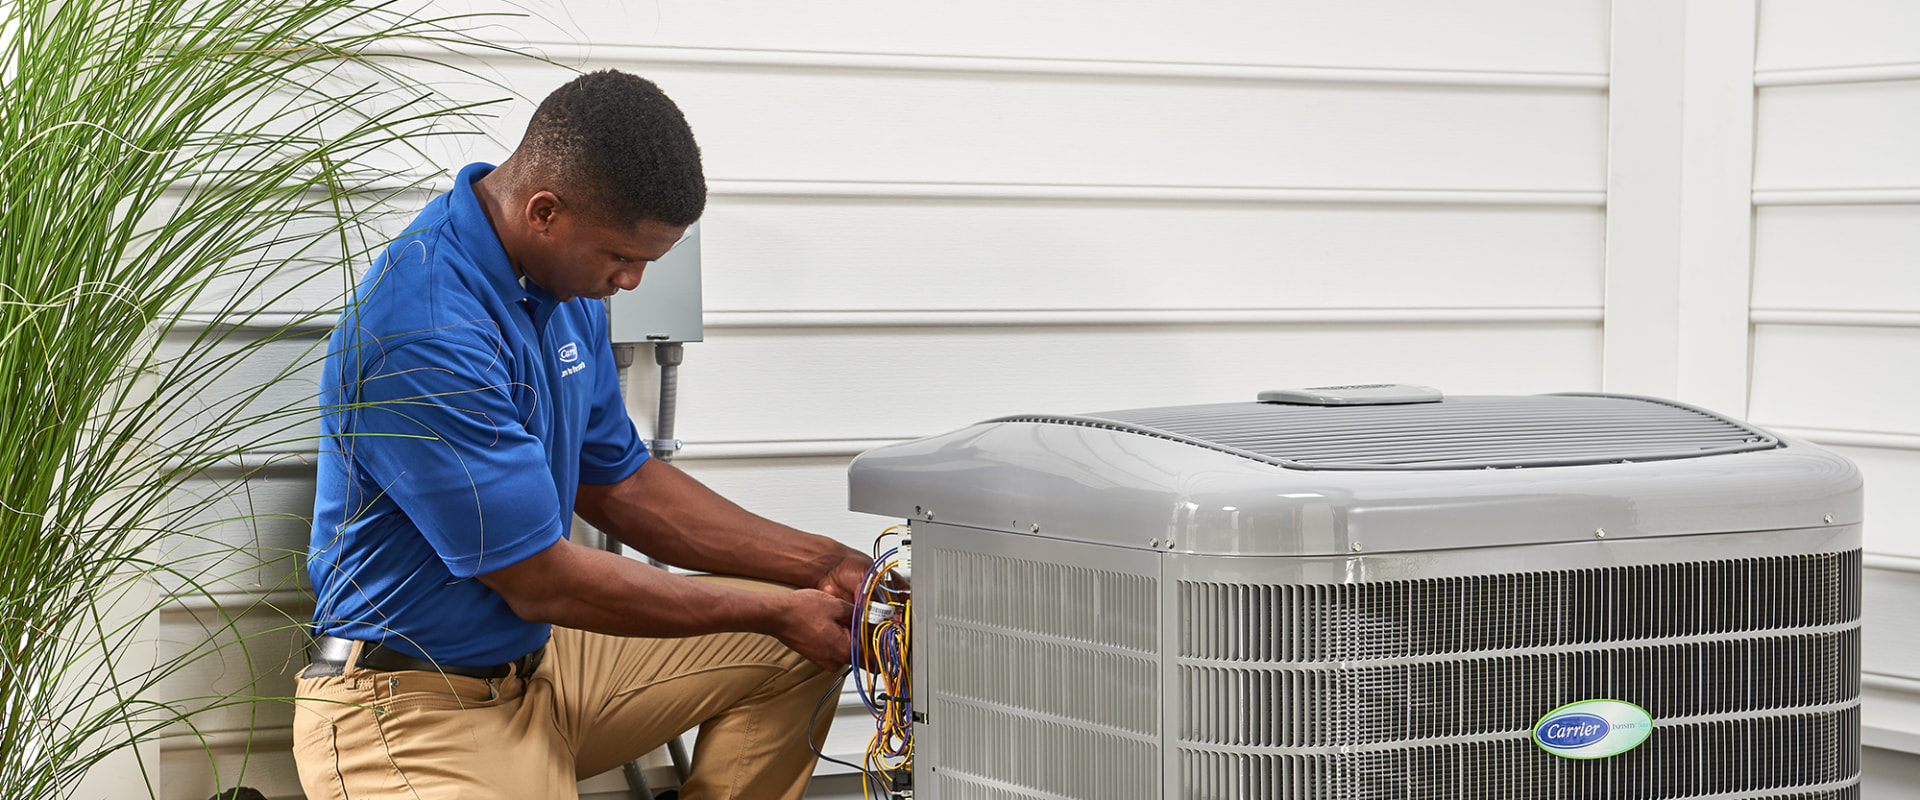 What is the typical life of an ac unit?